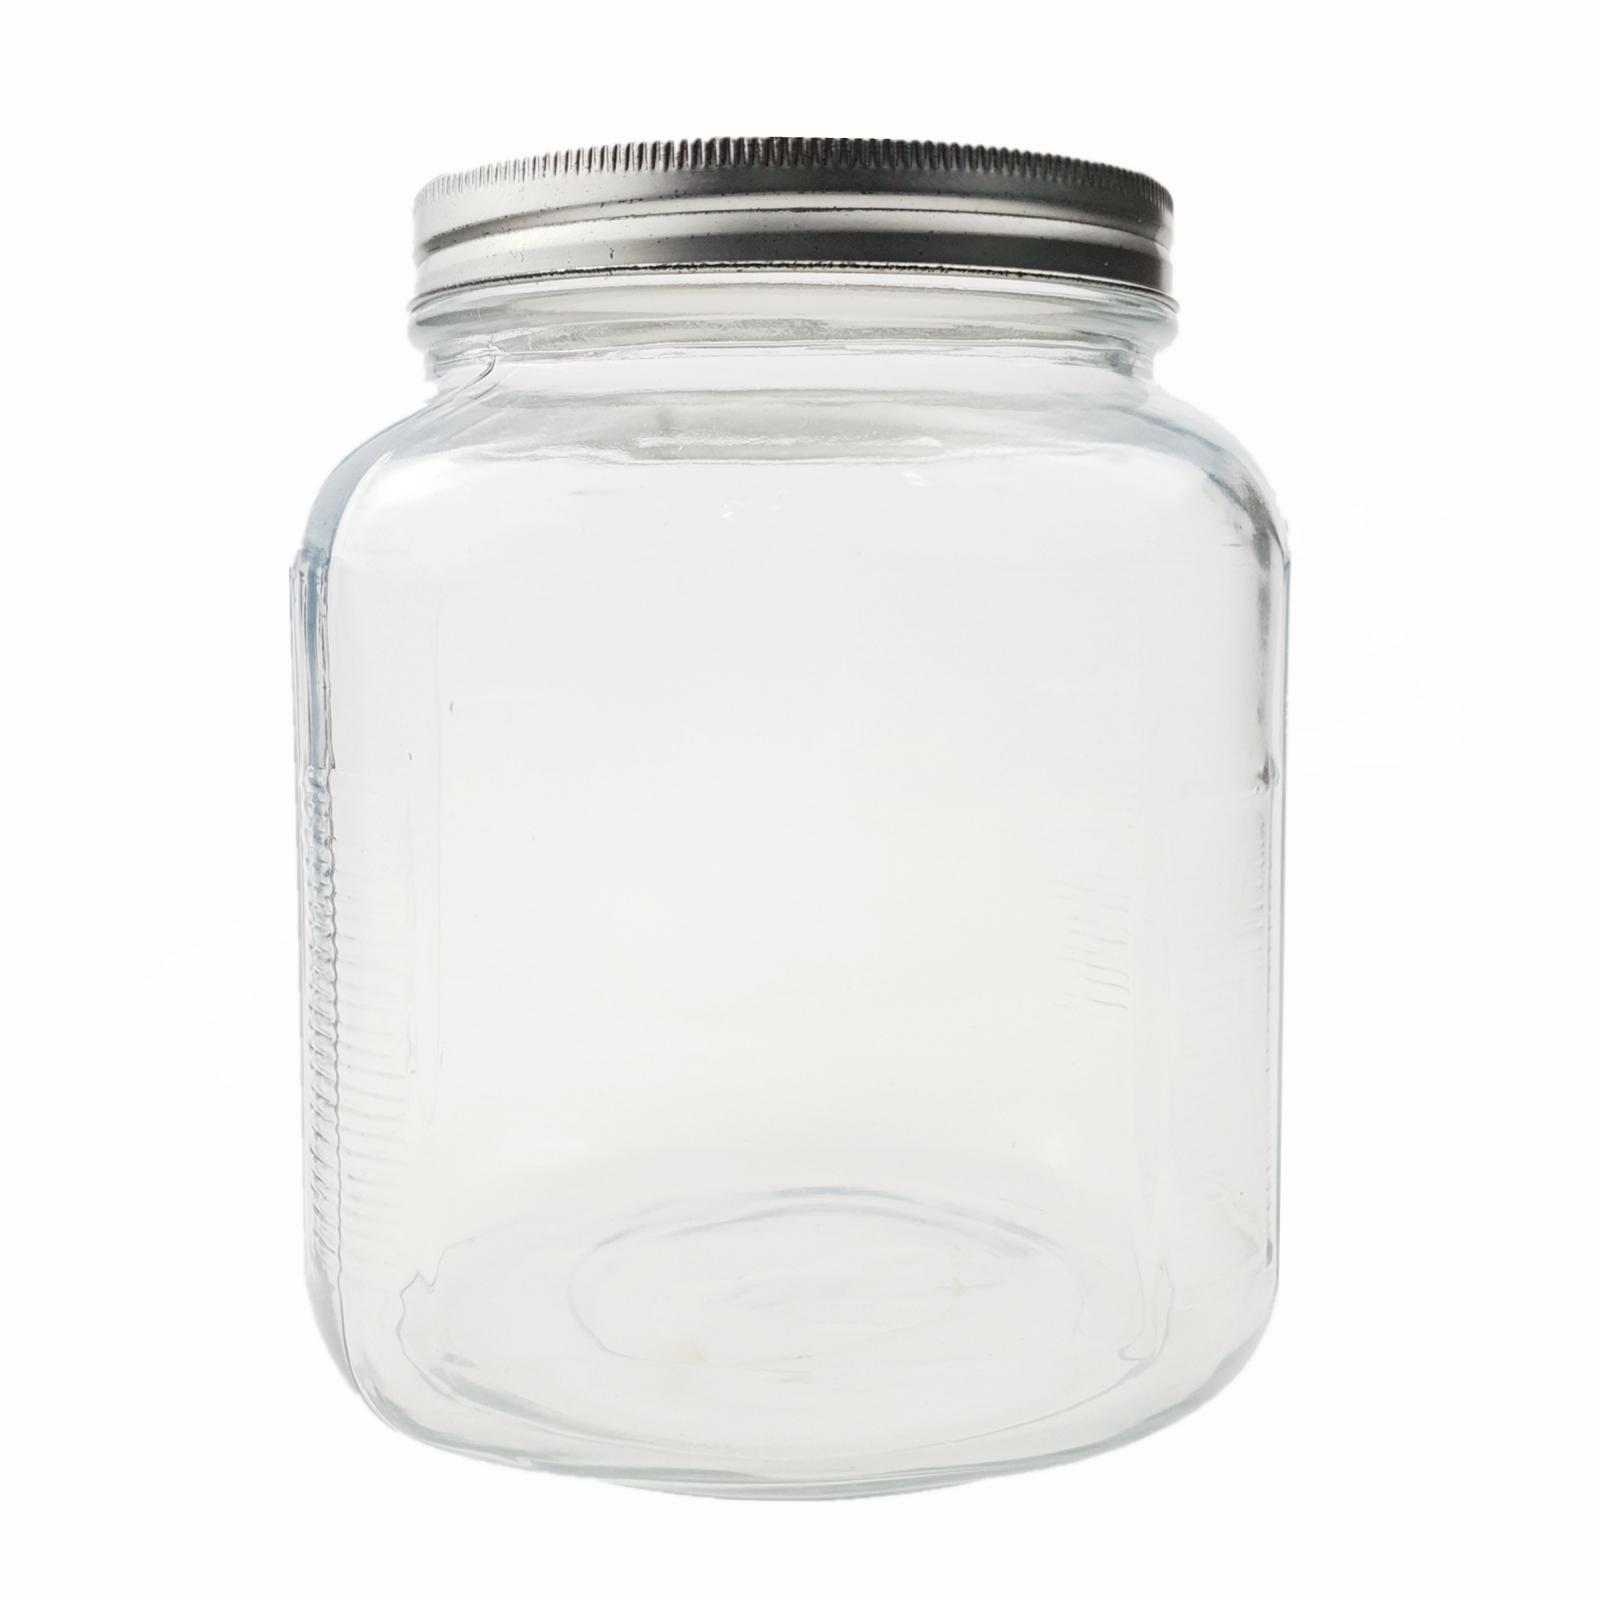 Glass Cookie Jars for Sale in Singapore- MEDTRA (S) Pte Ltd.